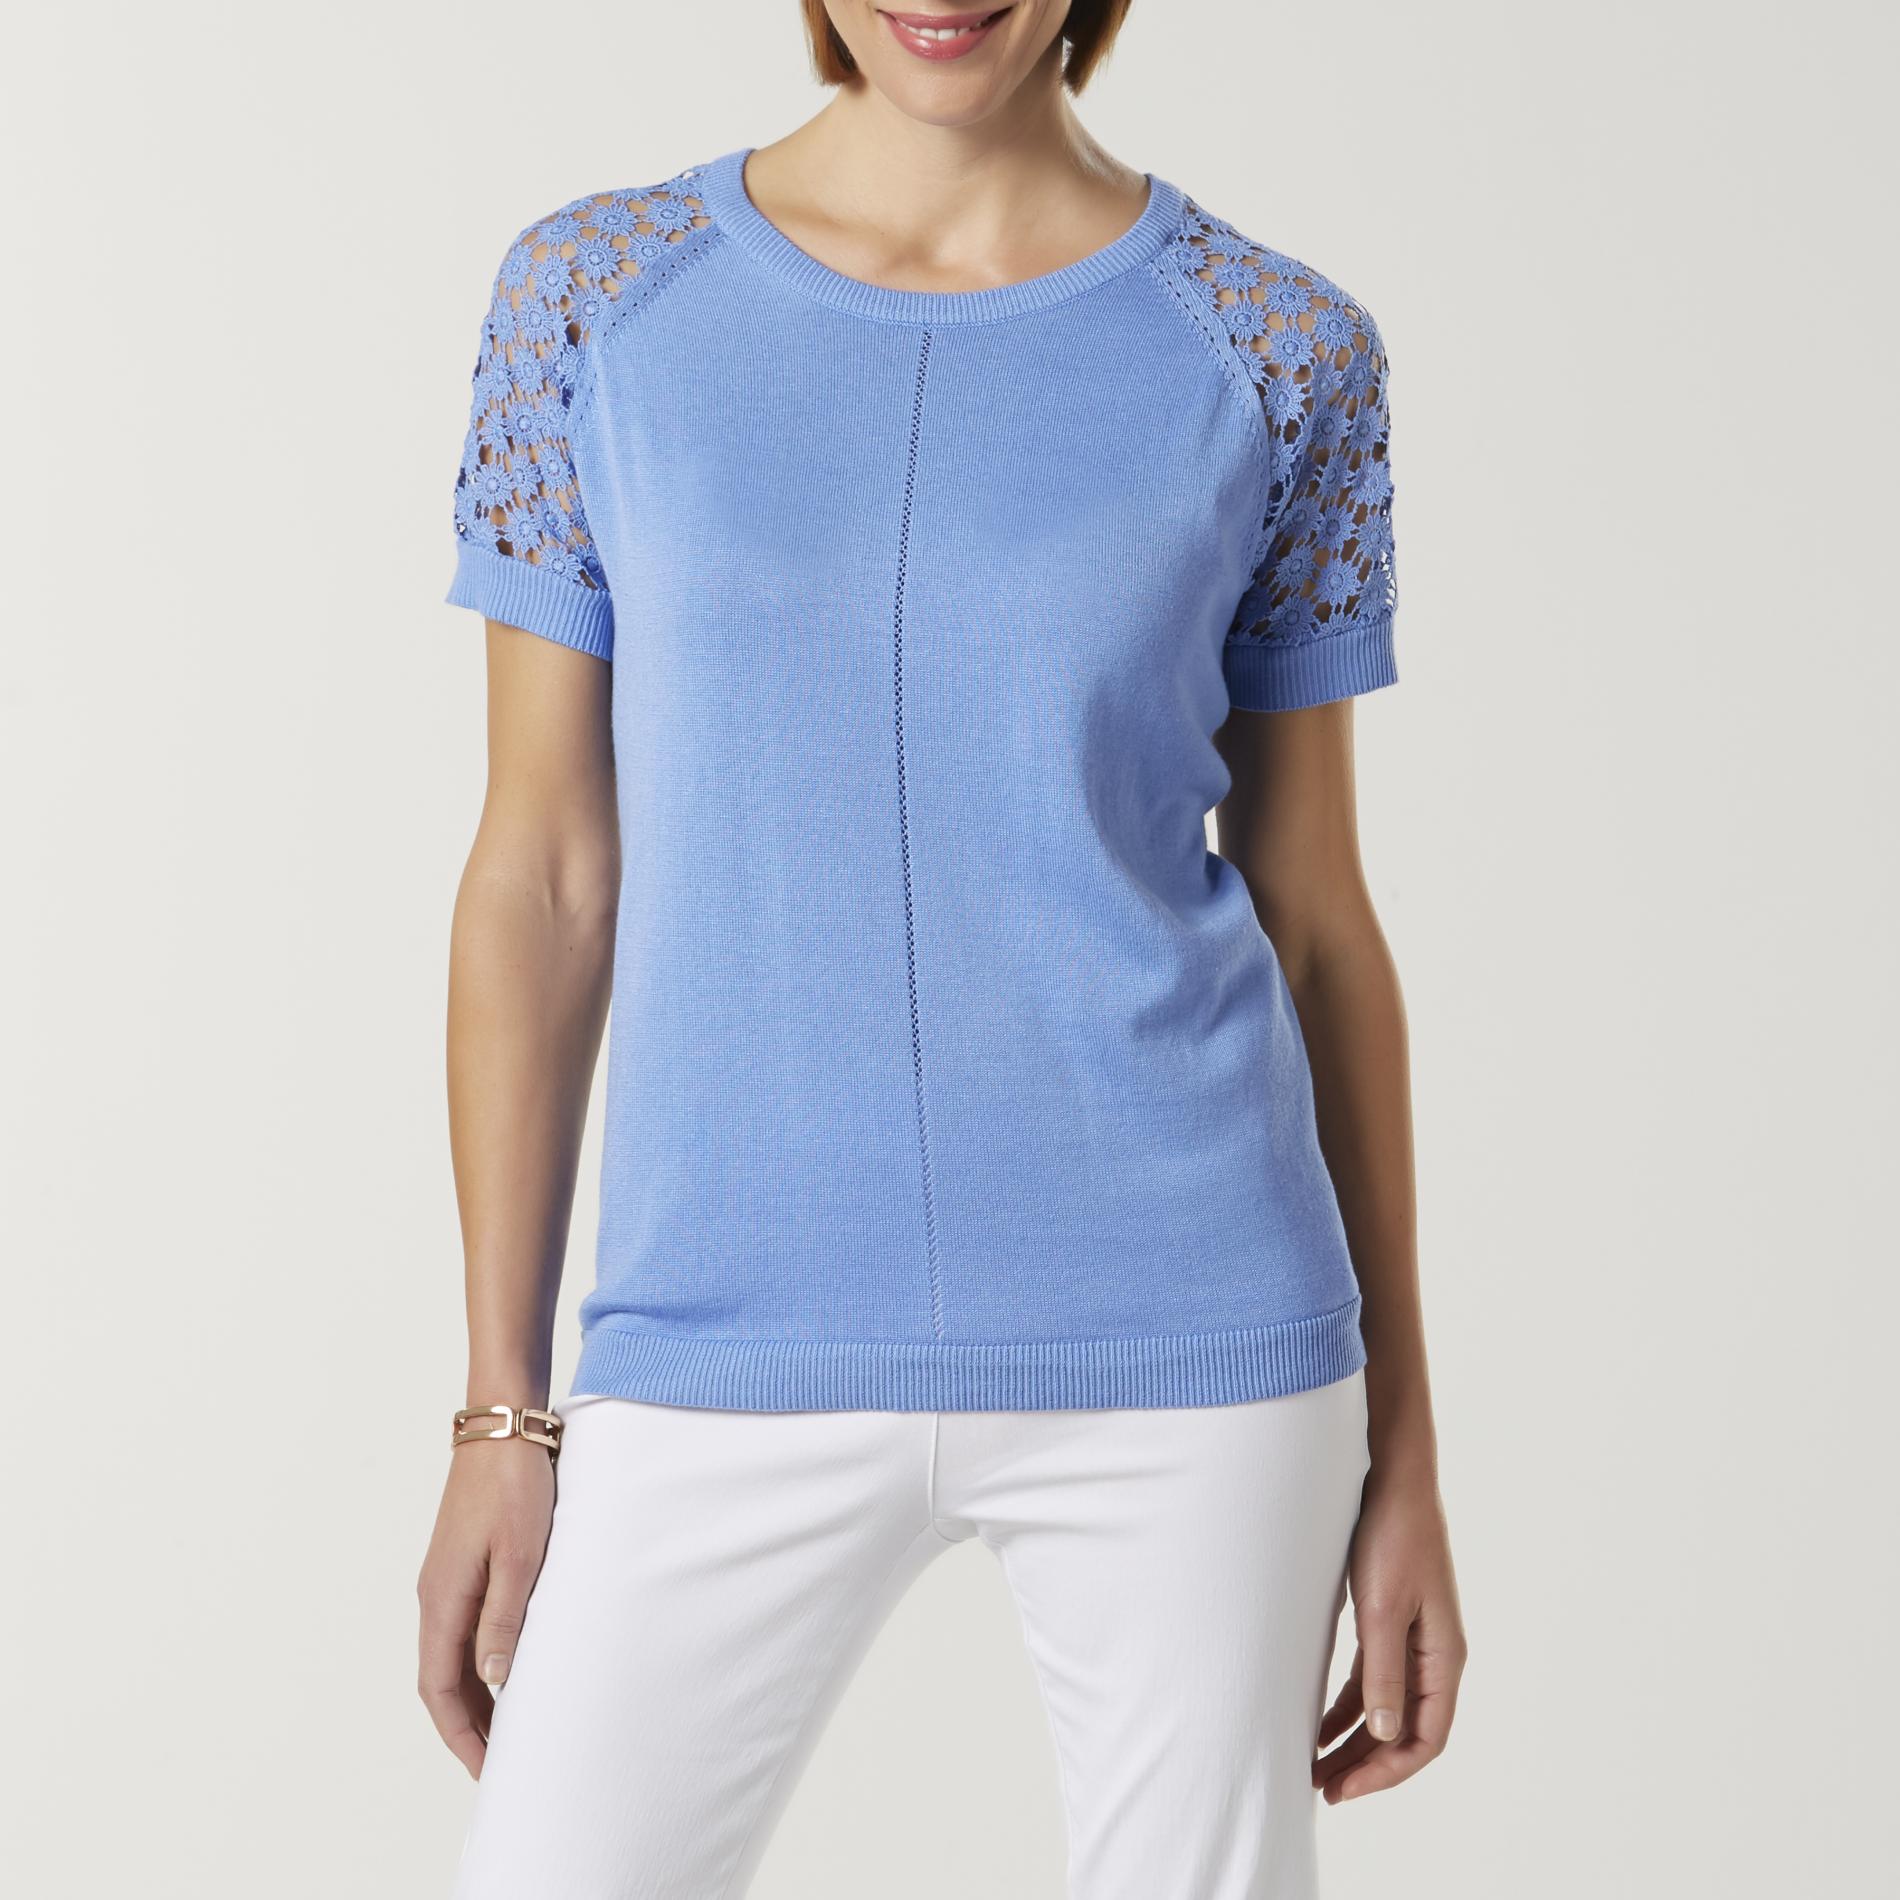 Basic Editions Women's Lace Shoulder Sweater